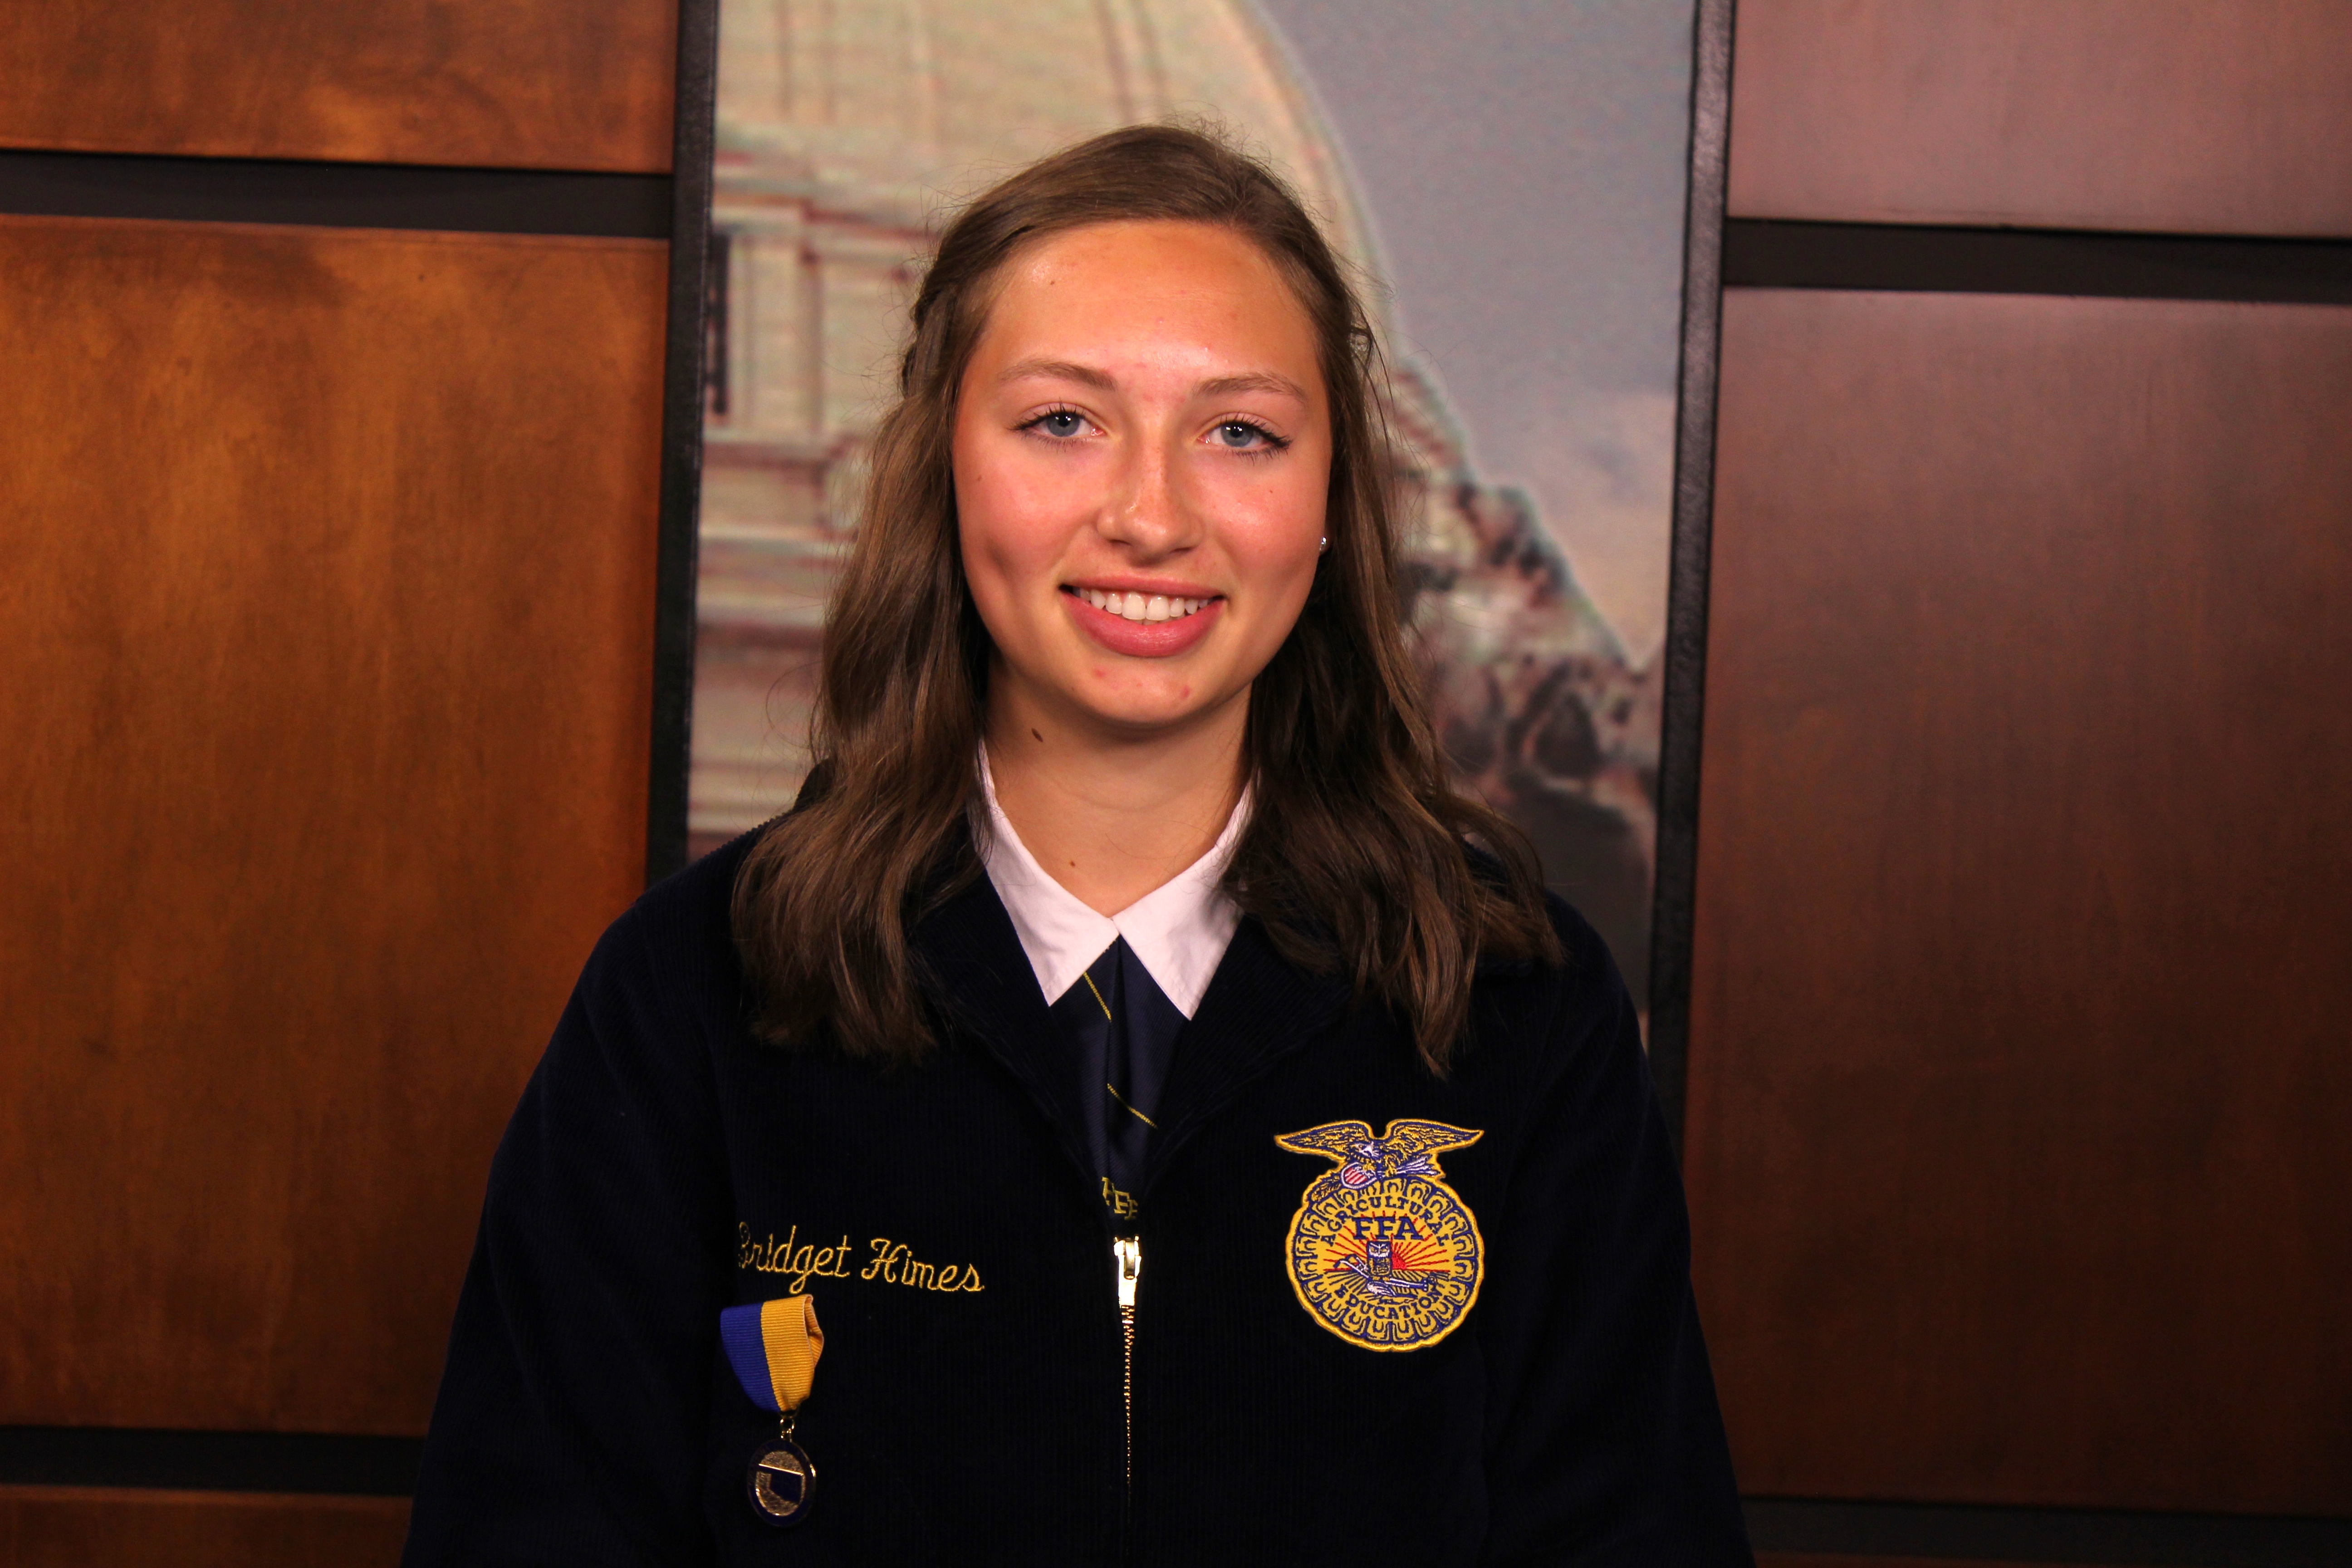 Introducing Bridget Himes of the Kingfisher FFA Chapter, Your 2022 Northwest Area Star in Agribusiness